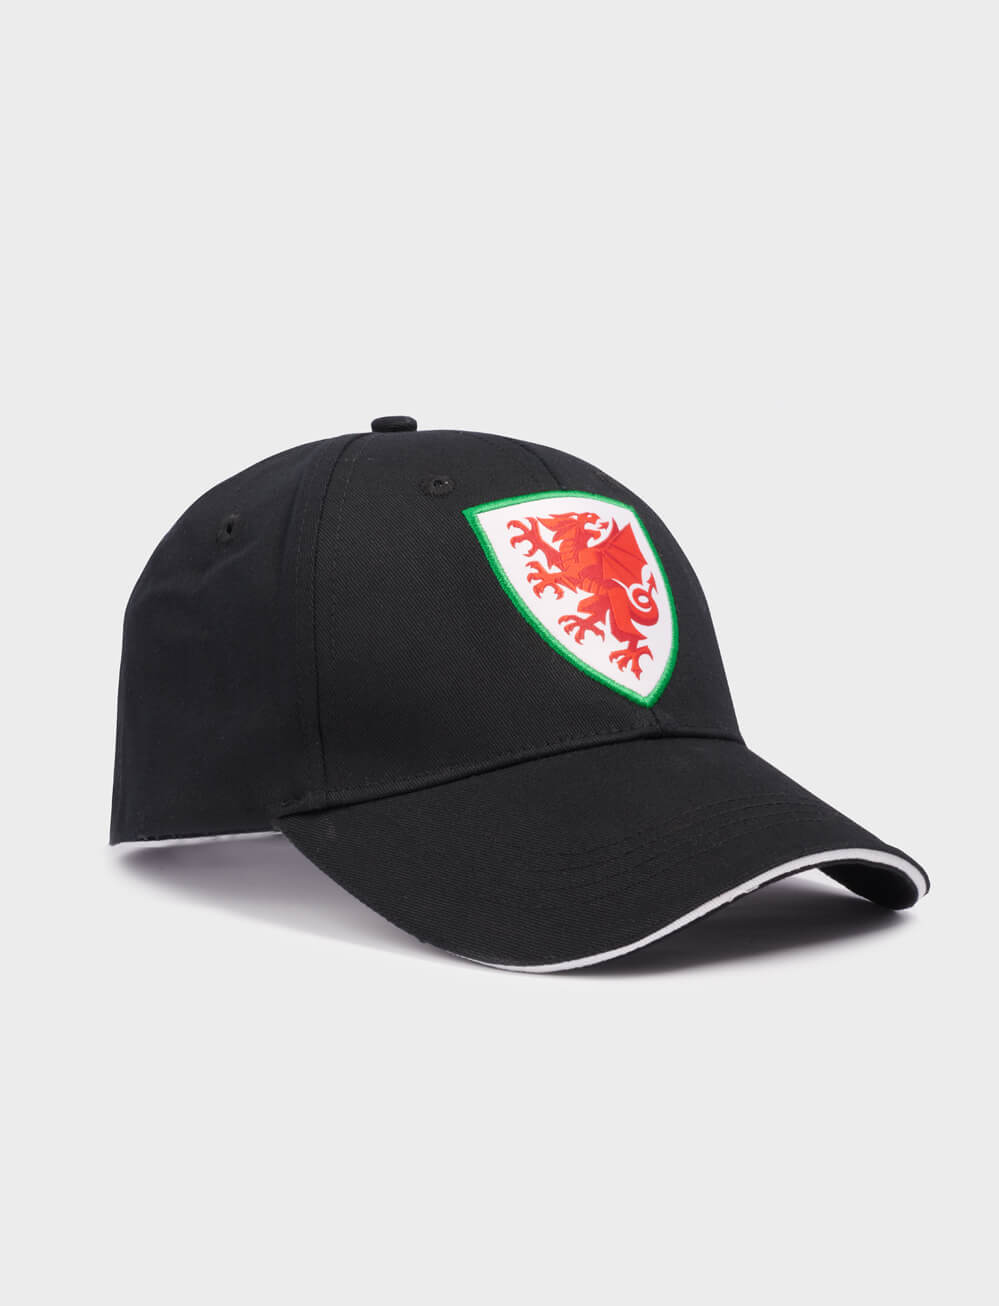 Official Team Wales Cap - Black - The World Football Store